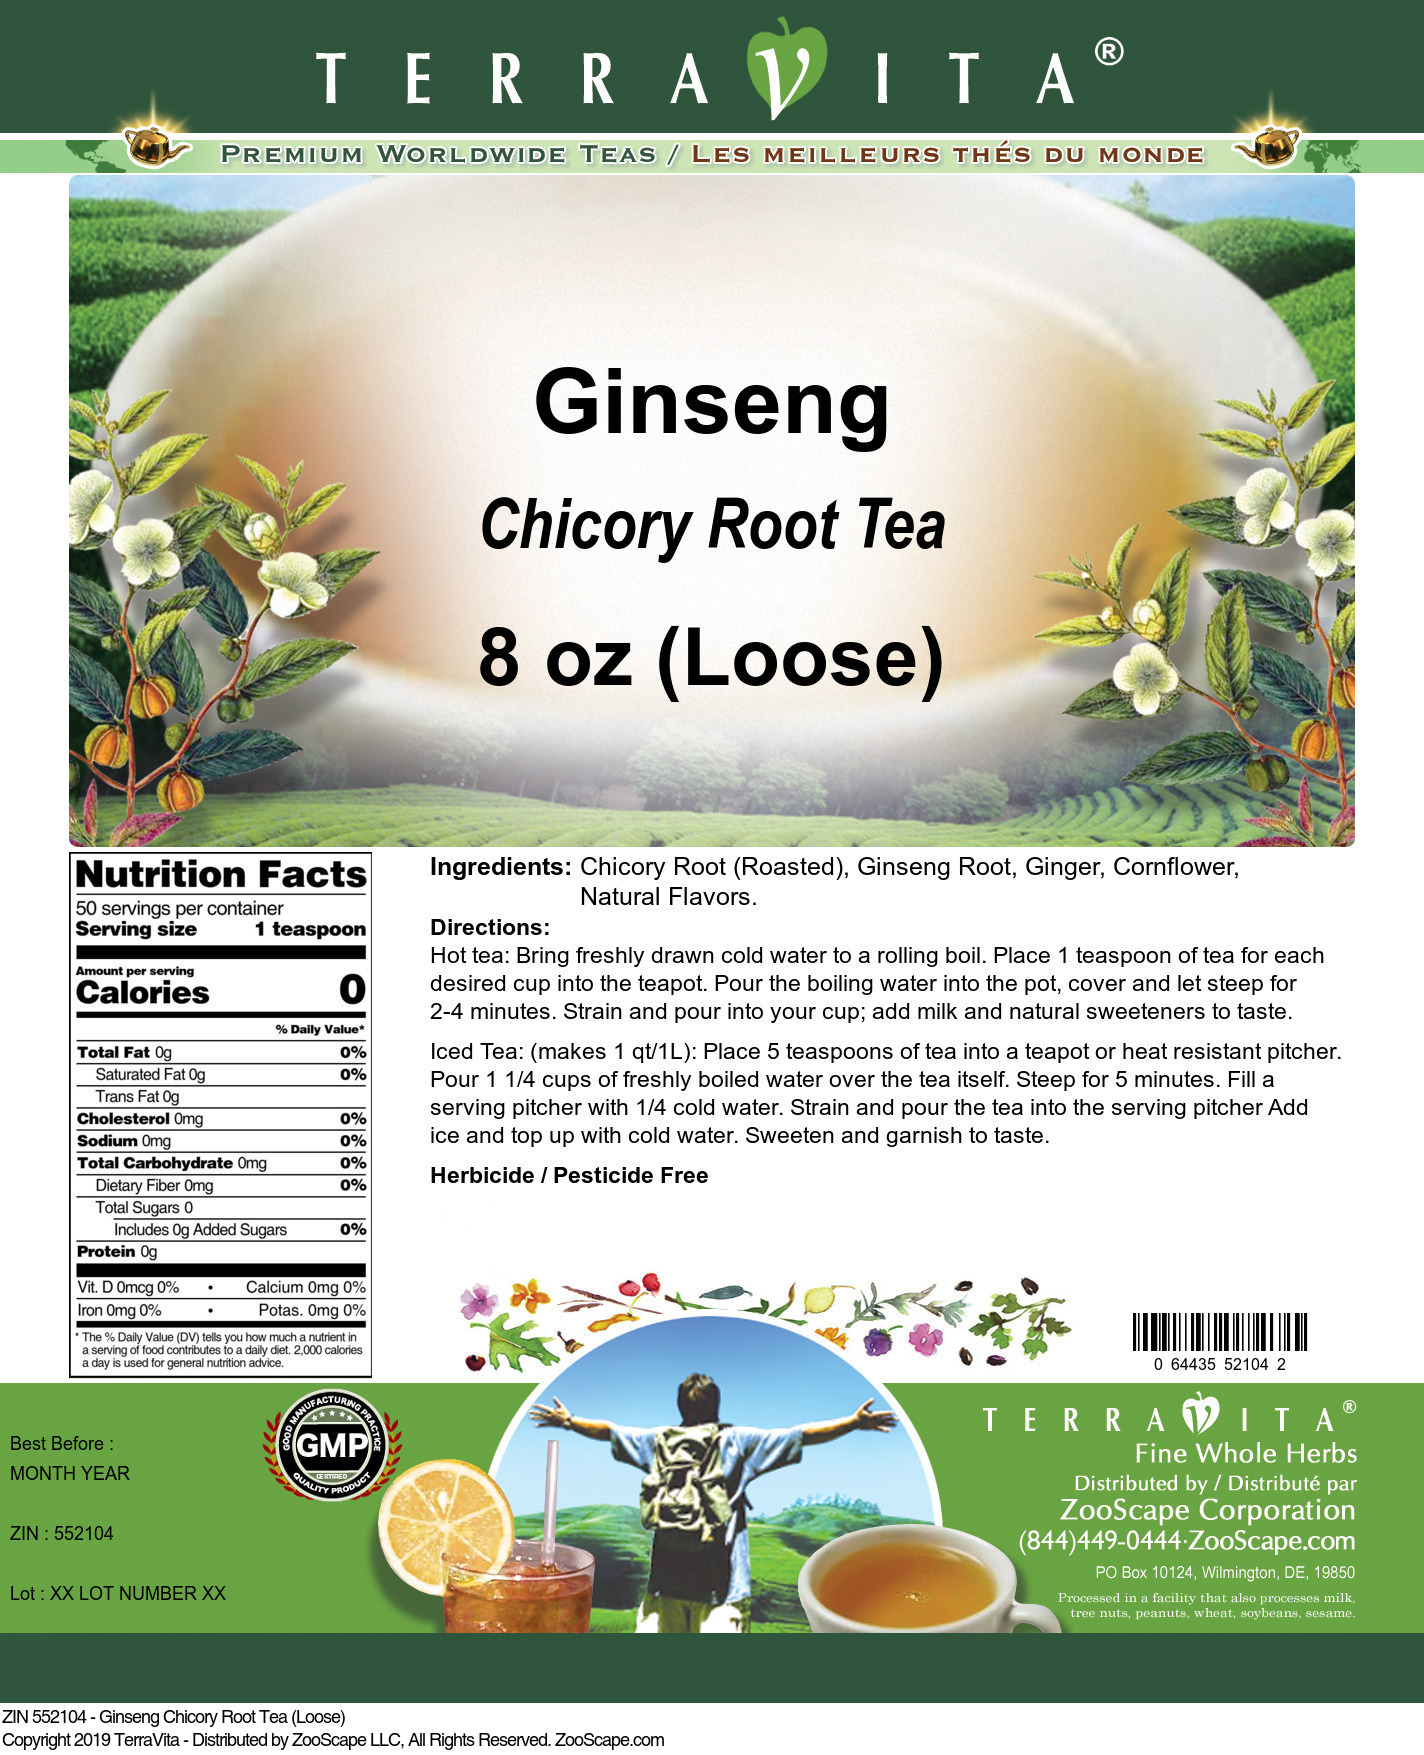 Ginseng Chicory Root Tea (Loose) - Label